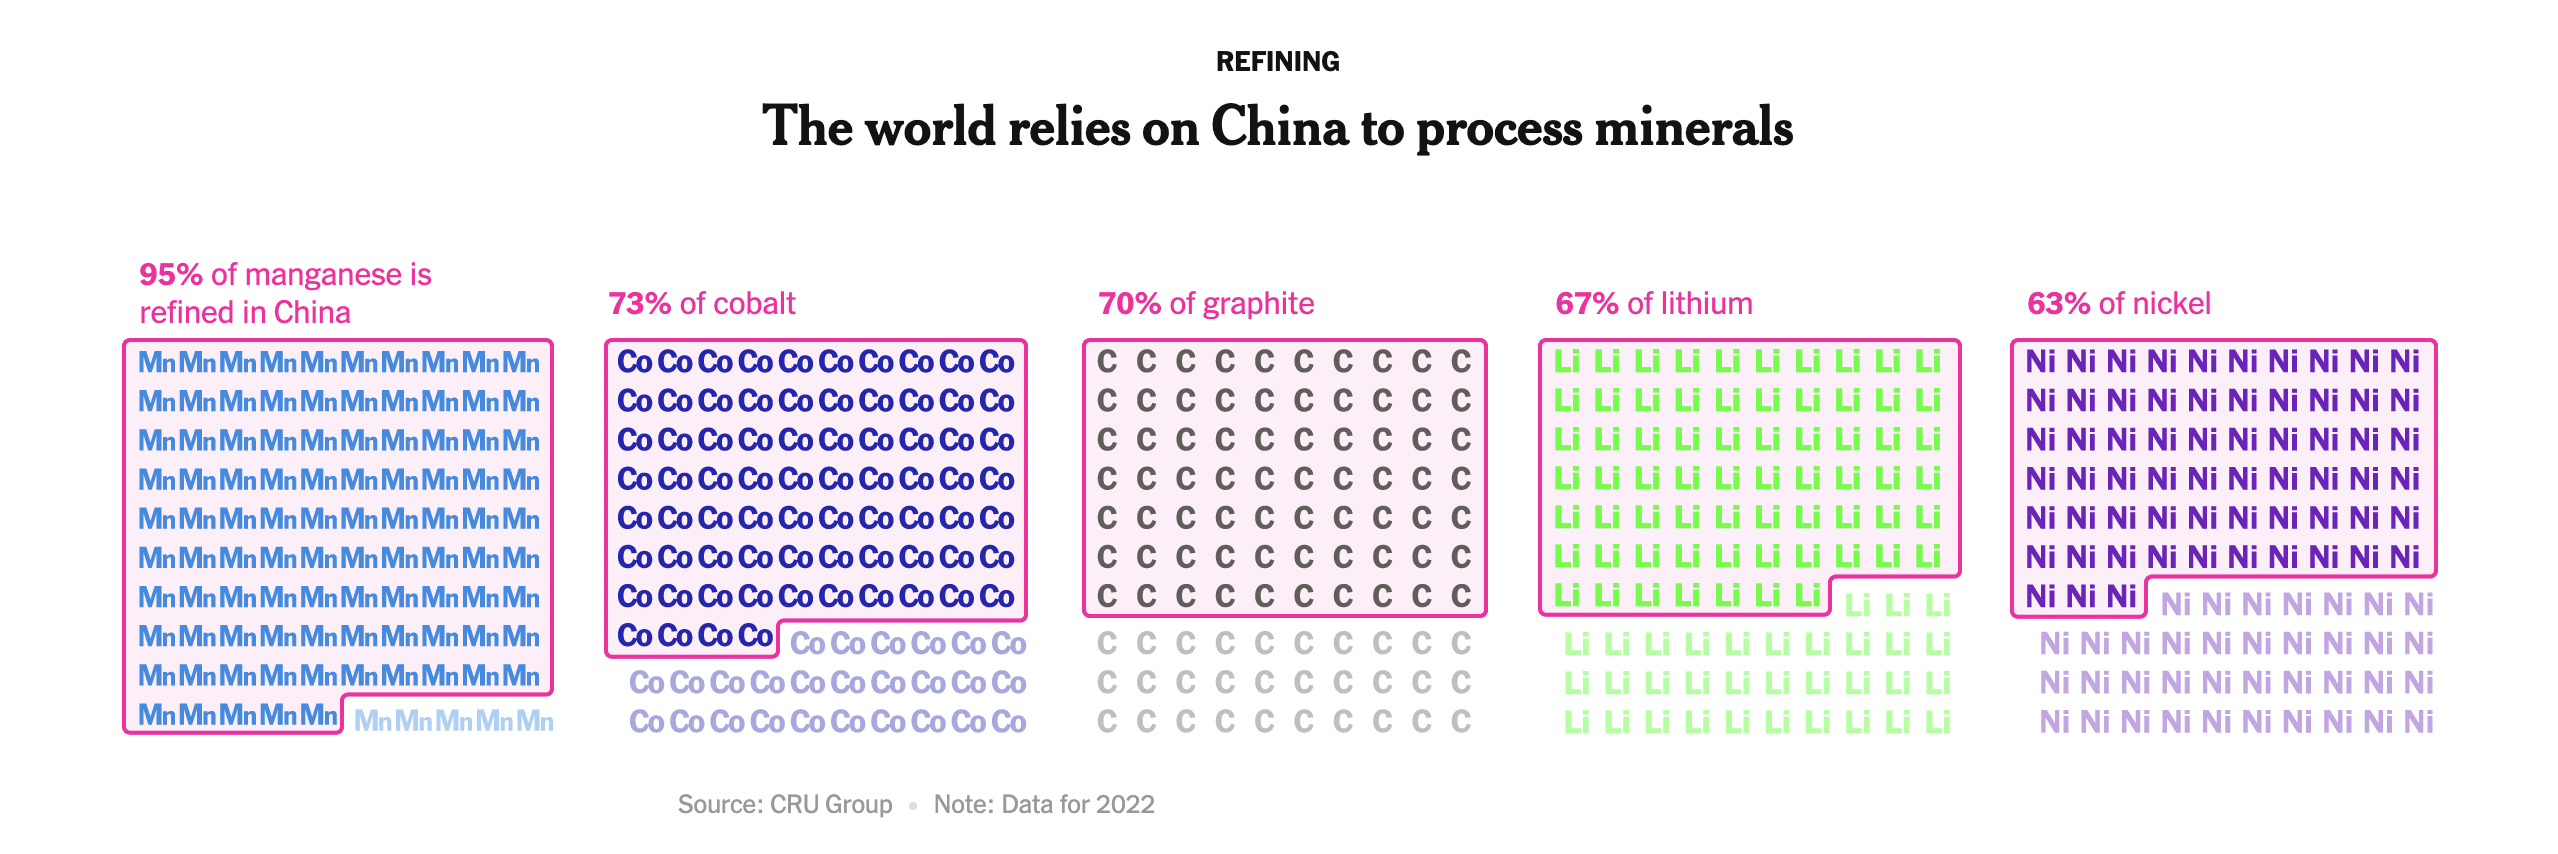 The world relies on China to process materials.